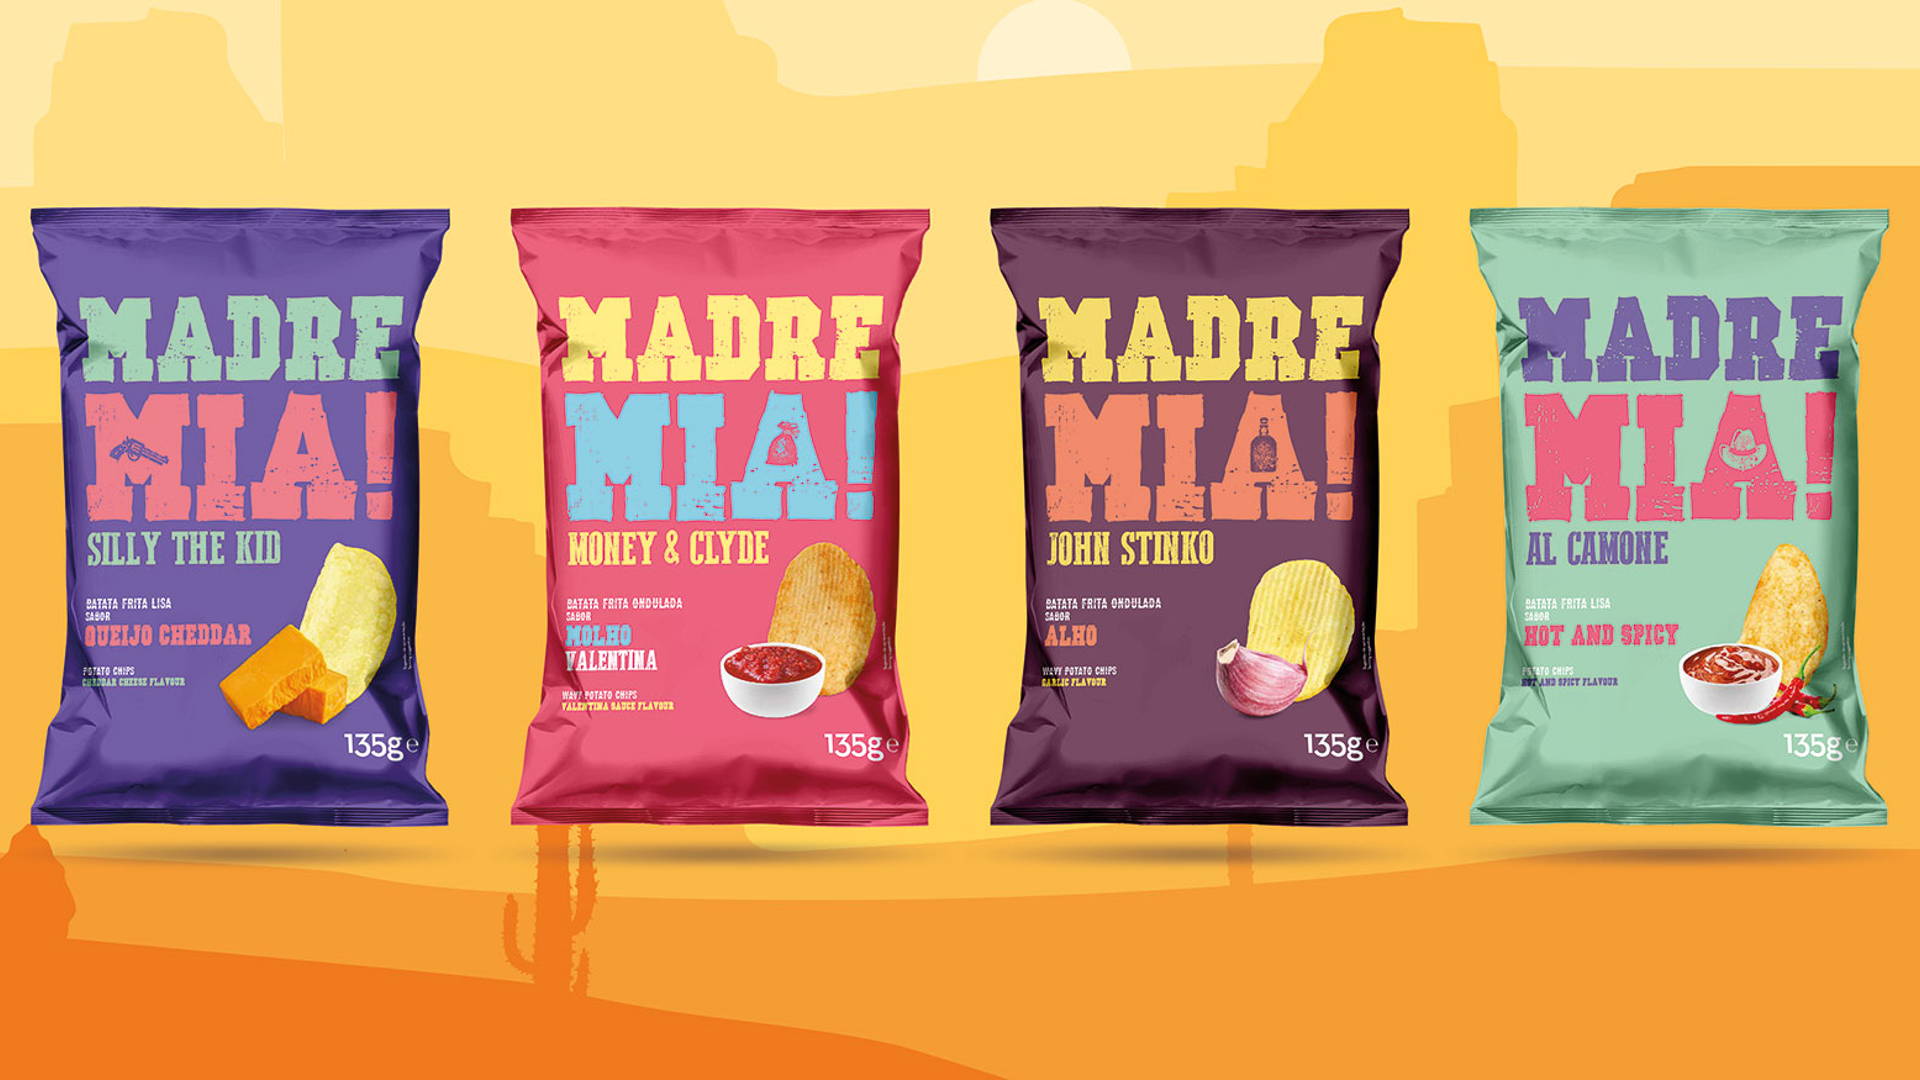 Featured image for Madre Mia! is the Potato Chip Brand That Plays Off Of Notorious Characters